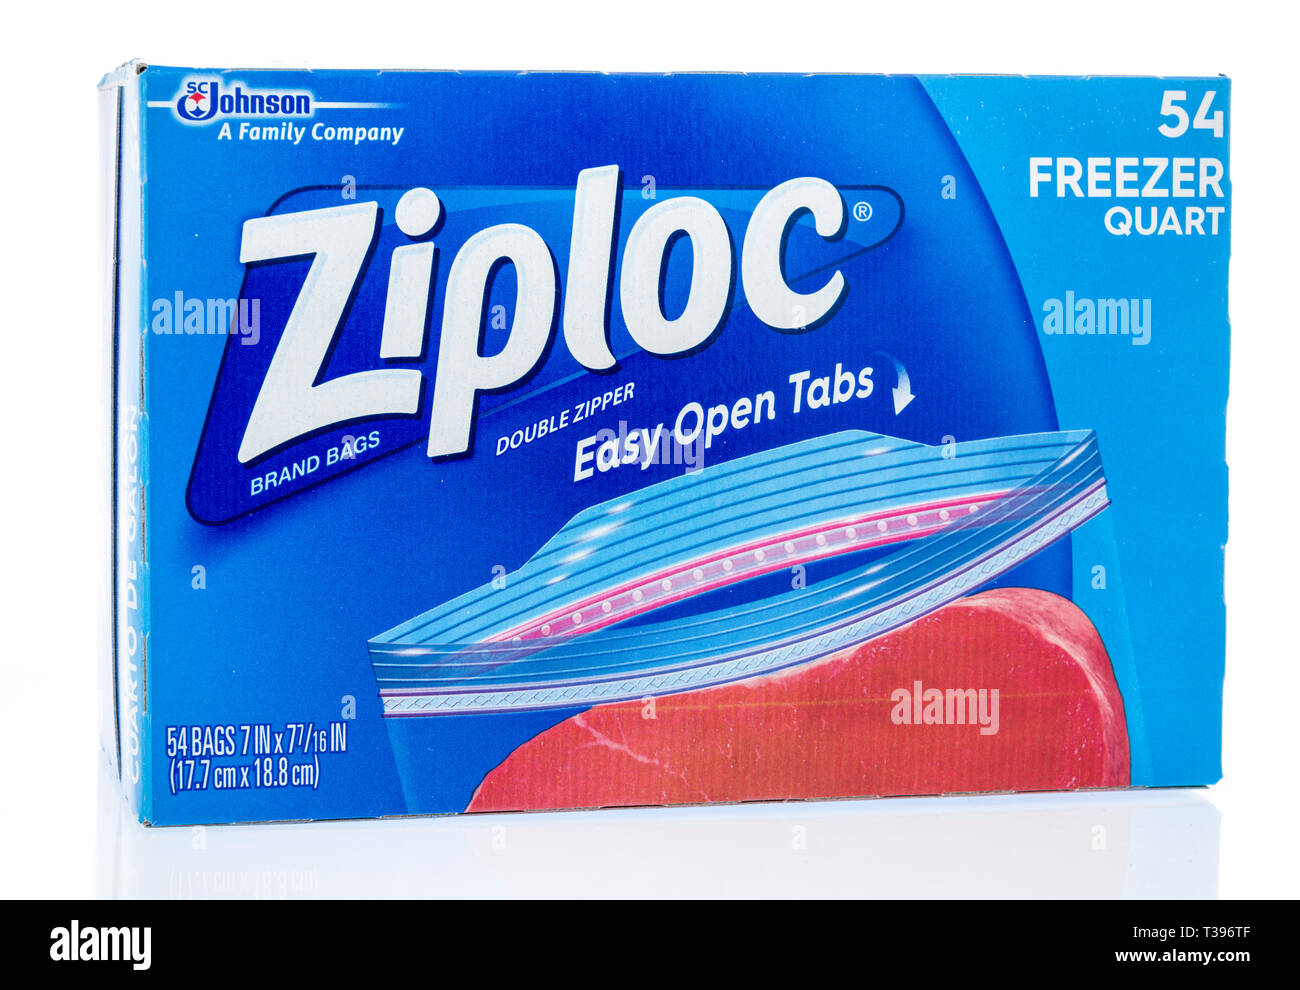 https://c8.alamy.com/comp/T396TF/winneconne-wi-7-april-2019-a-package-of-ziploc-brand-bags-double-zipper-with-easy-opne-tabs-in-freezer-quart-size-on-an-isolated-background-T396TF.jpg